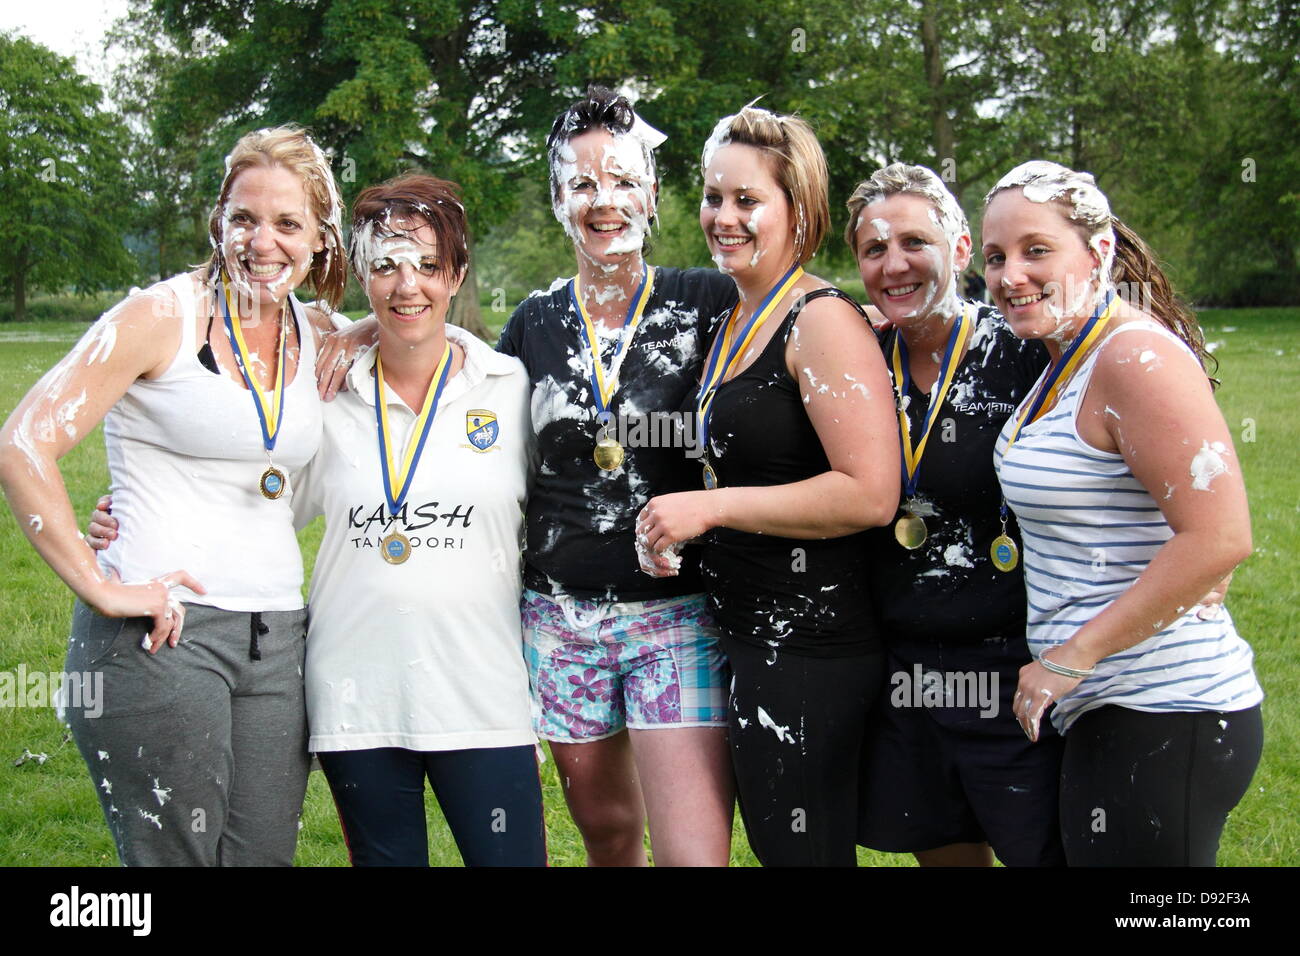 Bakewell, Derbyshire, UK. 9 June 2013.  Mr. Darcy Custard Pie Fight all-girl winning team from Matlock, Derbyshire.  (l-r) Nicola Crowder, Andrea Rodgers, Paula Sutherill, Aimee Wood, Liz Ashmore, Liz McGovern.  Mr. Darcy Custard Pie Fight, Bakewell Baking Festival, Derbyshire, UK.  Mr Darcy's Custard Pie Fight marked the 200th anniversary of Jane Austen's Pride and Prejudice that was part-written in Bakewell's Rutland Arms Hotel.  Teams, with one member dressed as Mr. Darcy, launched pies whilst attempting to keep their Darcy clean. Credit:  Deborah Vernon/Alamy Live News Stock Photo